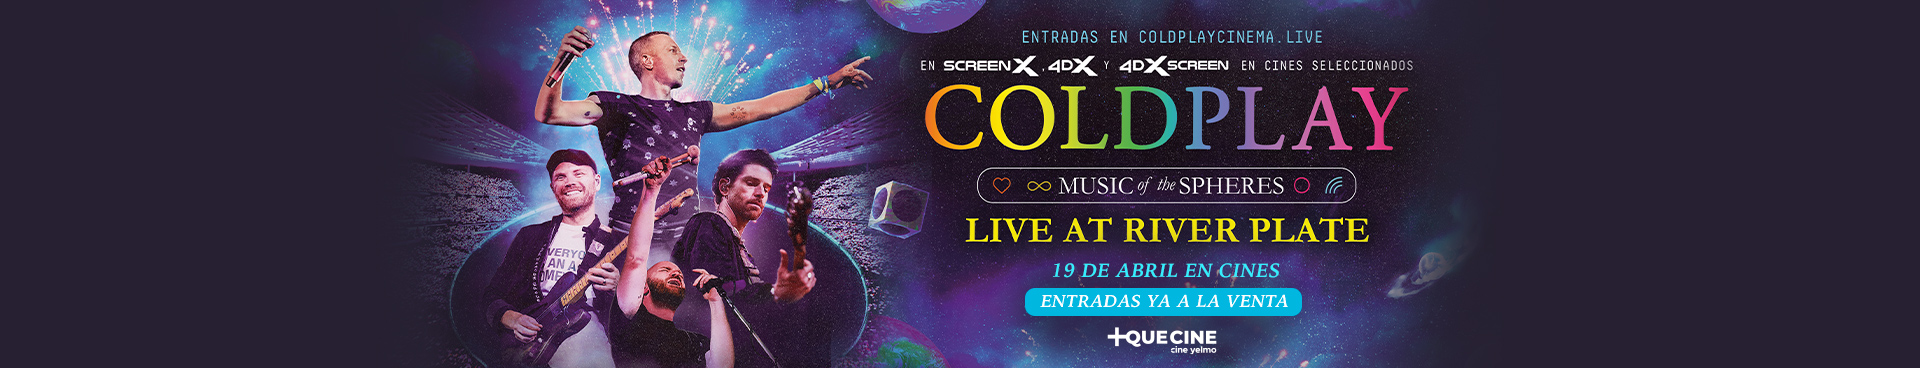 Coldplay live at river plate